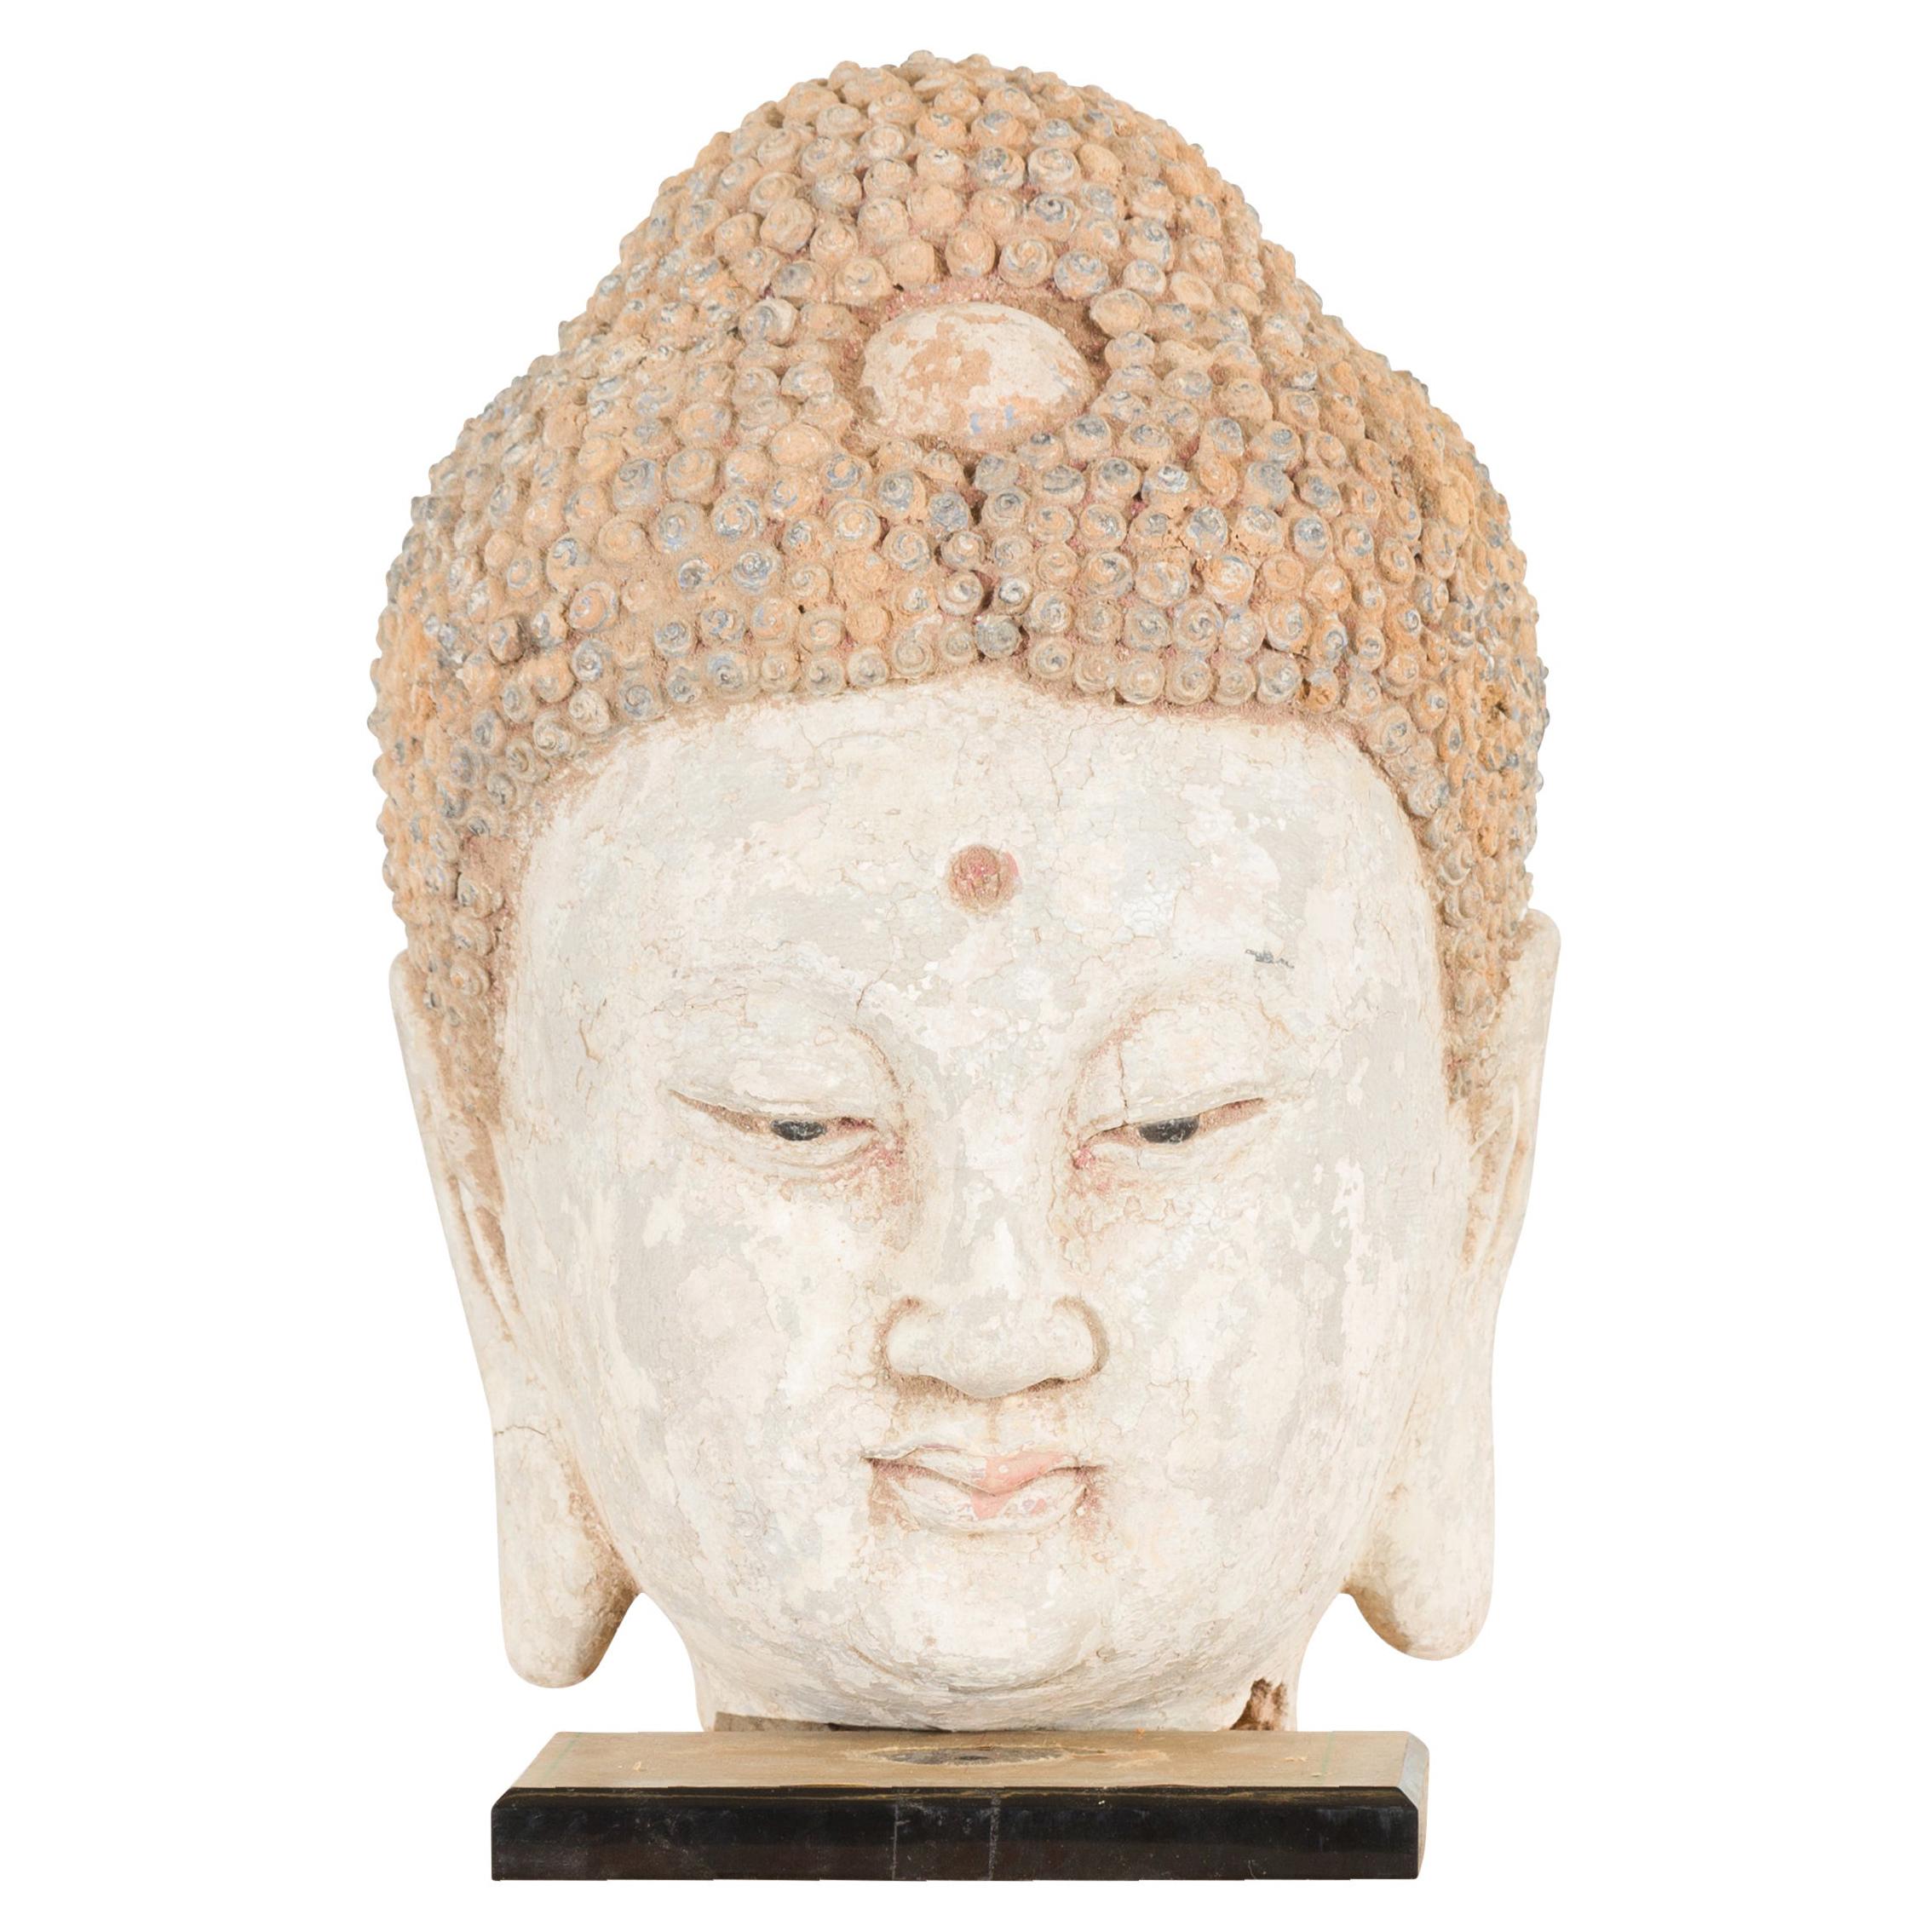 Chinese 18th Century or Earlier Terracotta Buddha Head Sculpture on Custom Stand